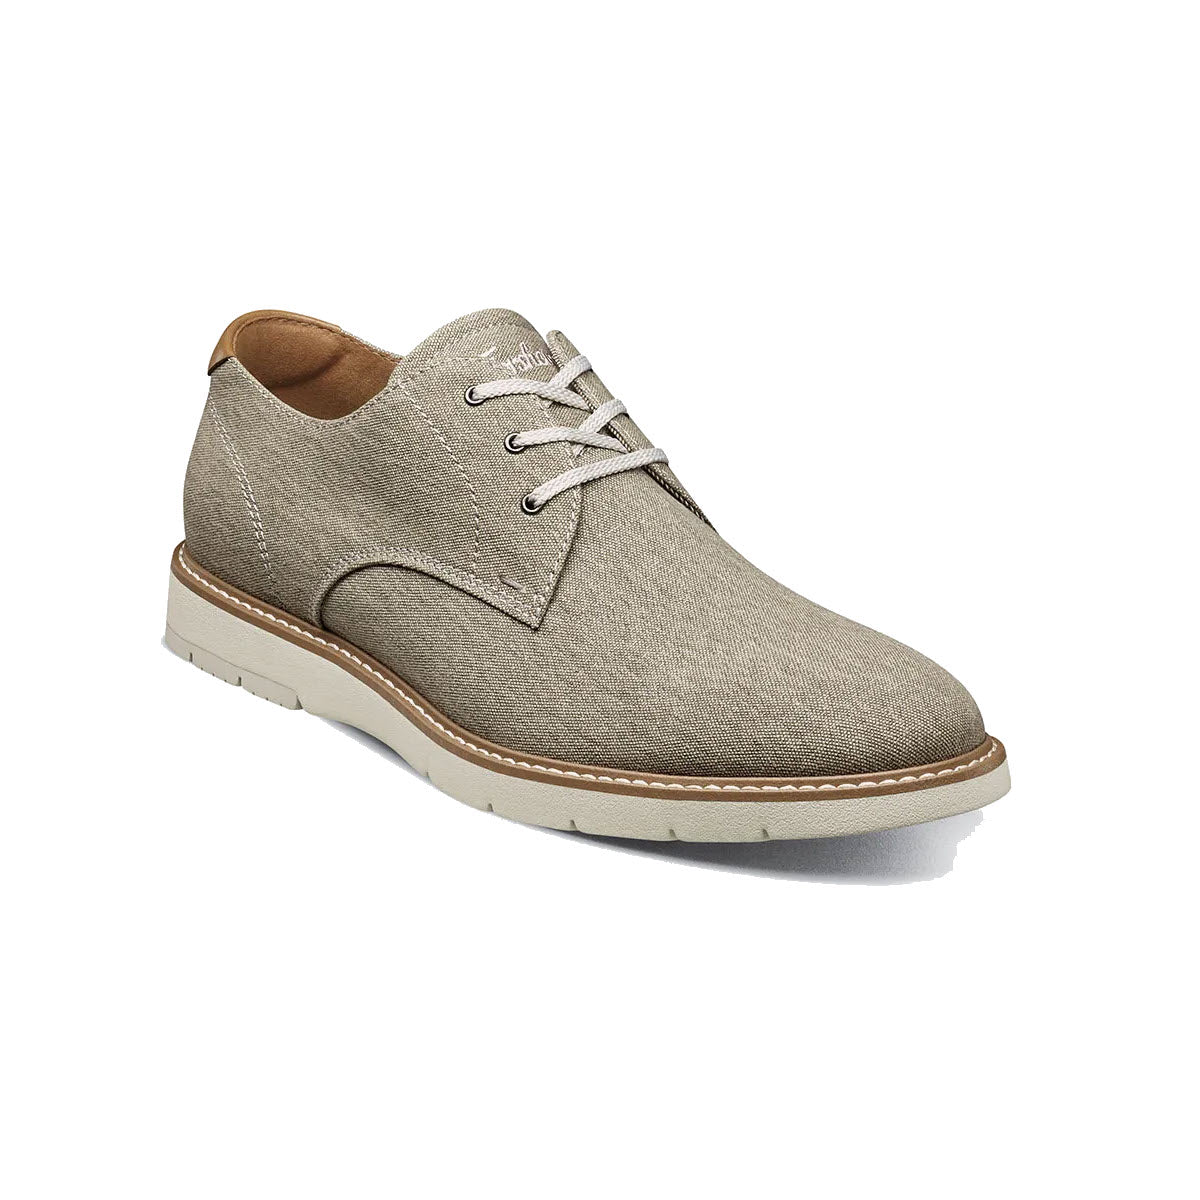 A beige suede Florsheim Plain Toe Oxford with light brown laces on a white background.